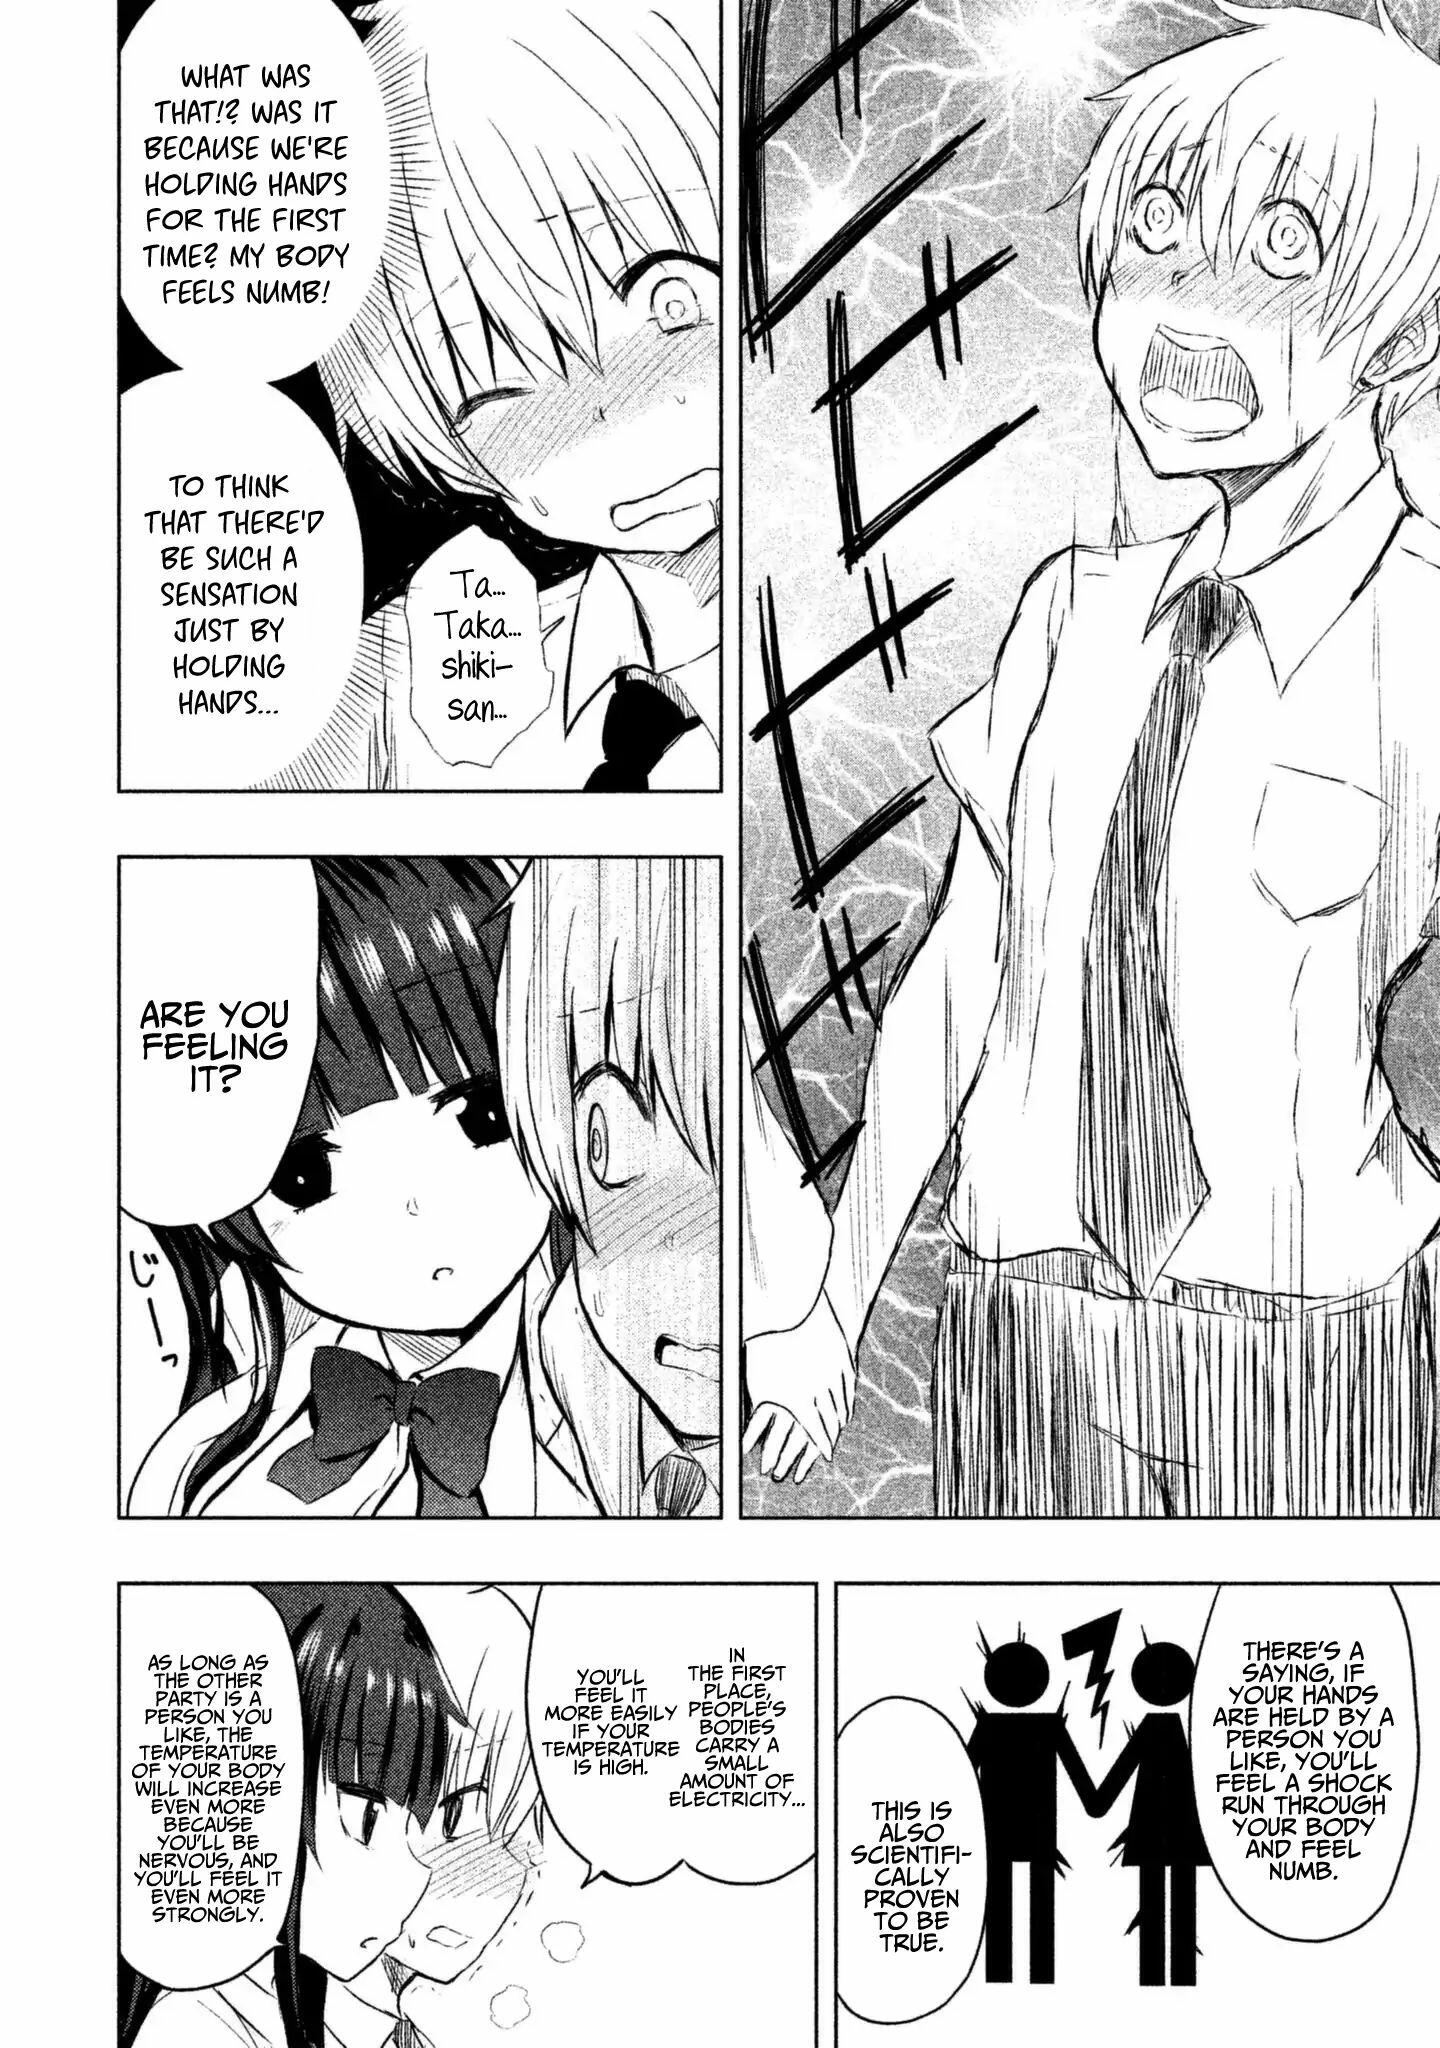 A Girl Who Is Very Well-Informed About Weird Knowledge, Takayukashiki Souko-San Vol.1 Chapter 9: Science Club page 7 - Mangakakalots.com